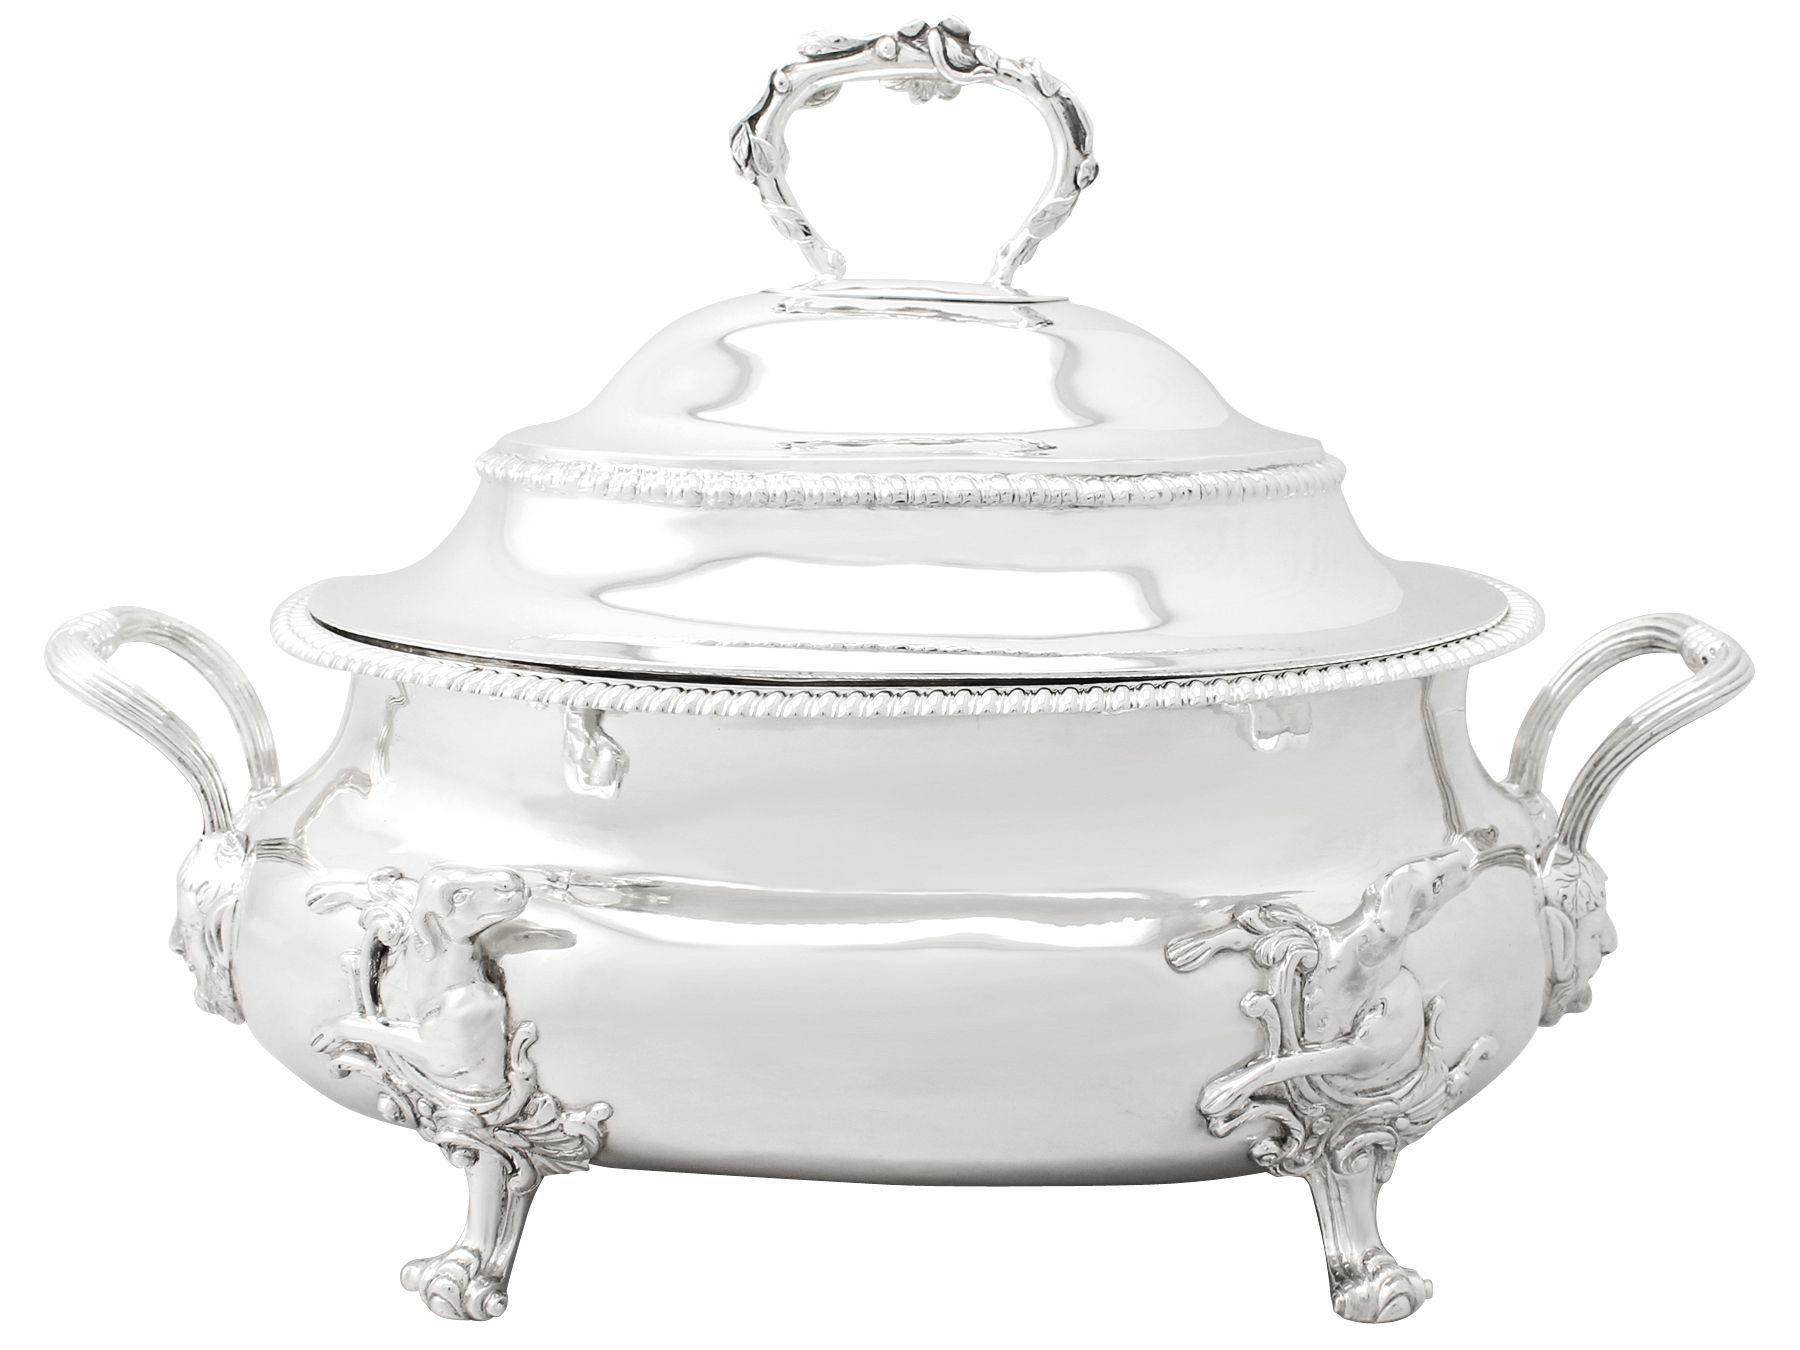 Antique Georgian English Sterling Silver Soup Tureen In Excellent Condition For Sale In Jesmond, Newcastle Upon Tyne